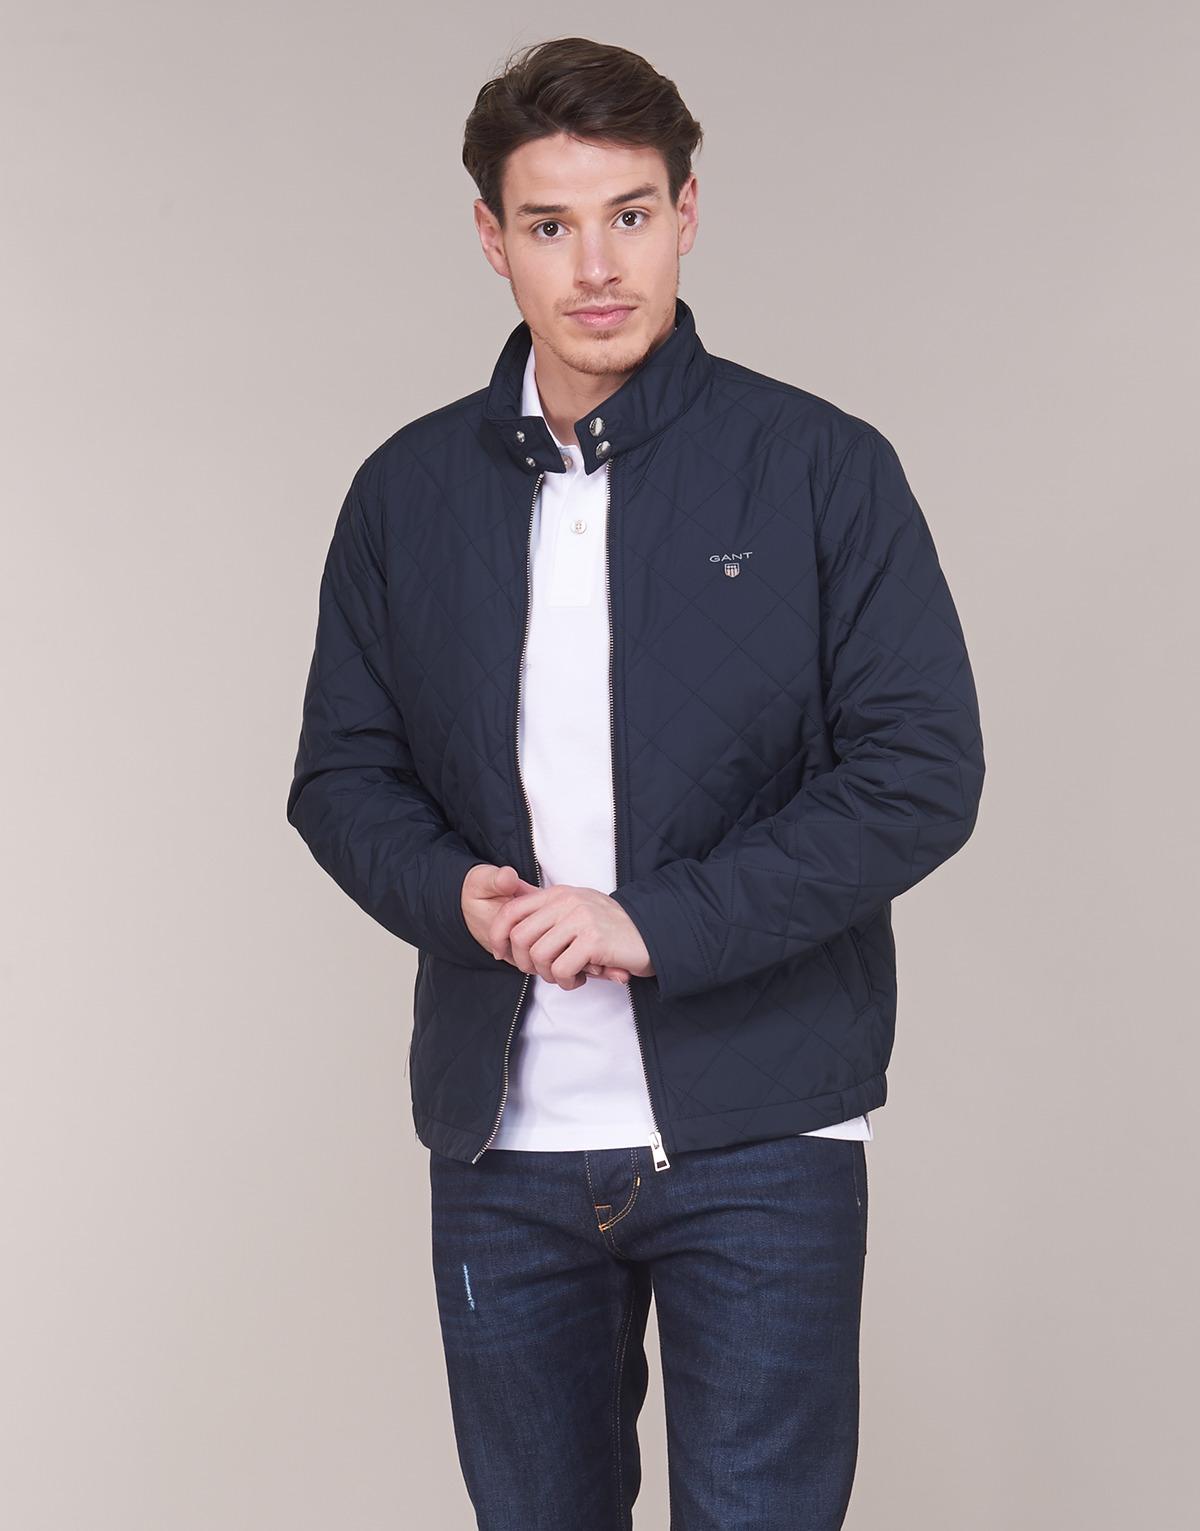 GANT The Quilted Windcheater Jacket in Blue for Men - Lyst